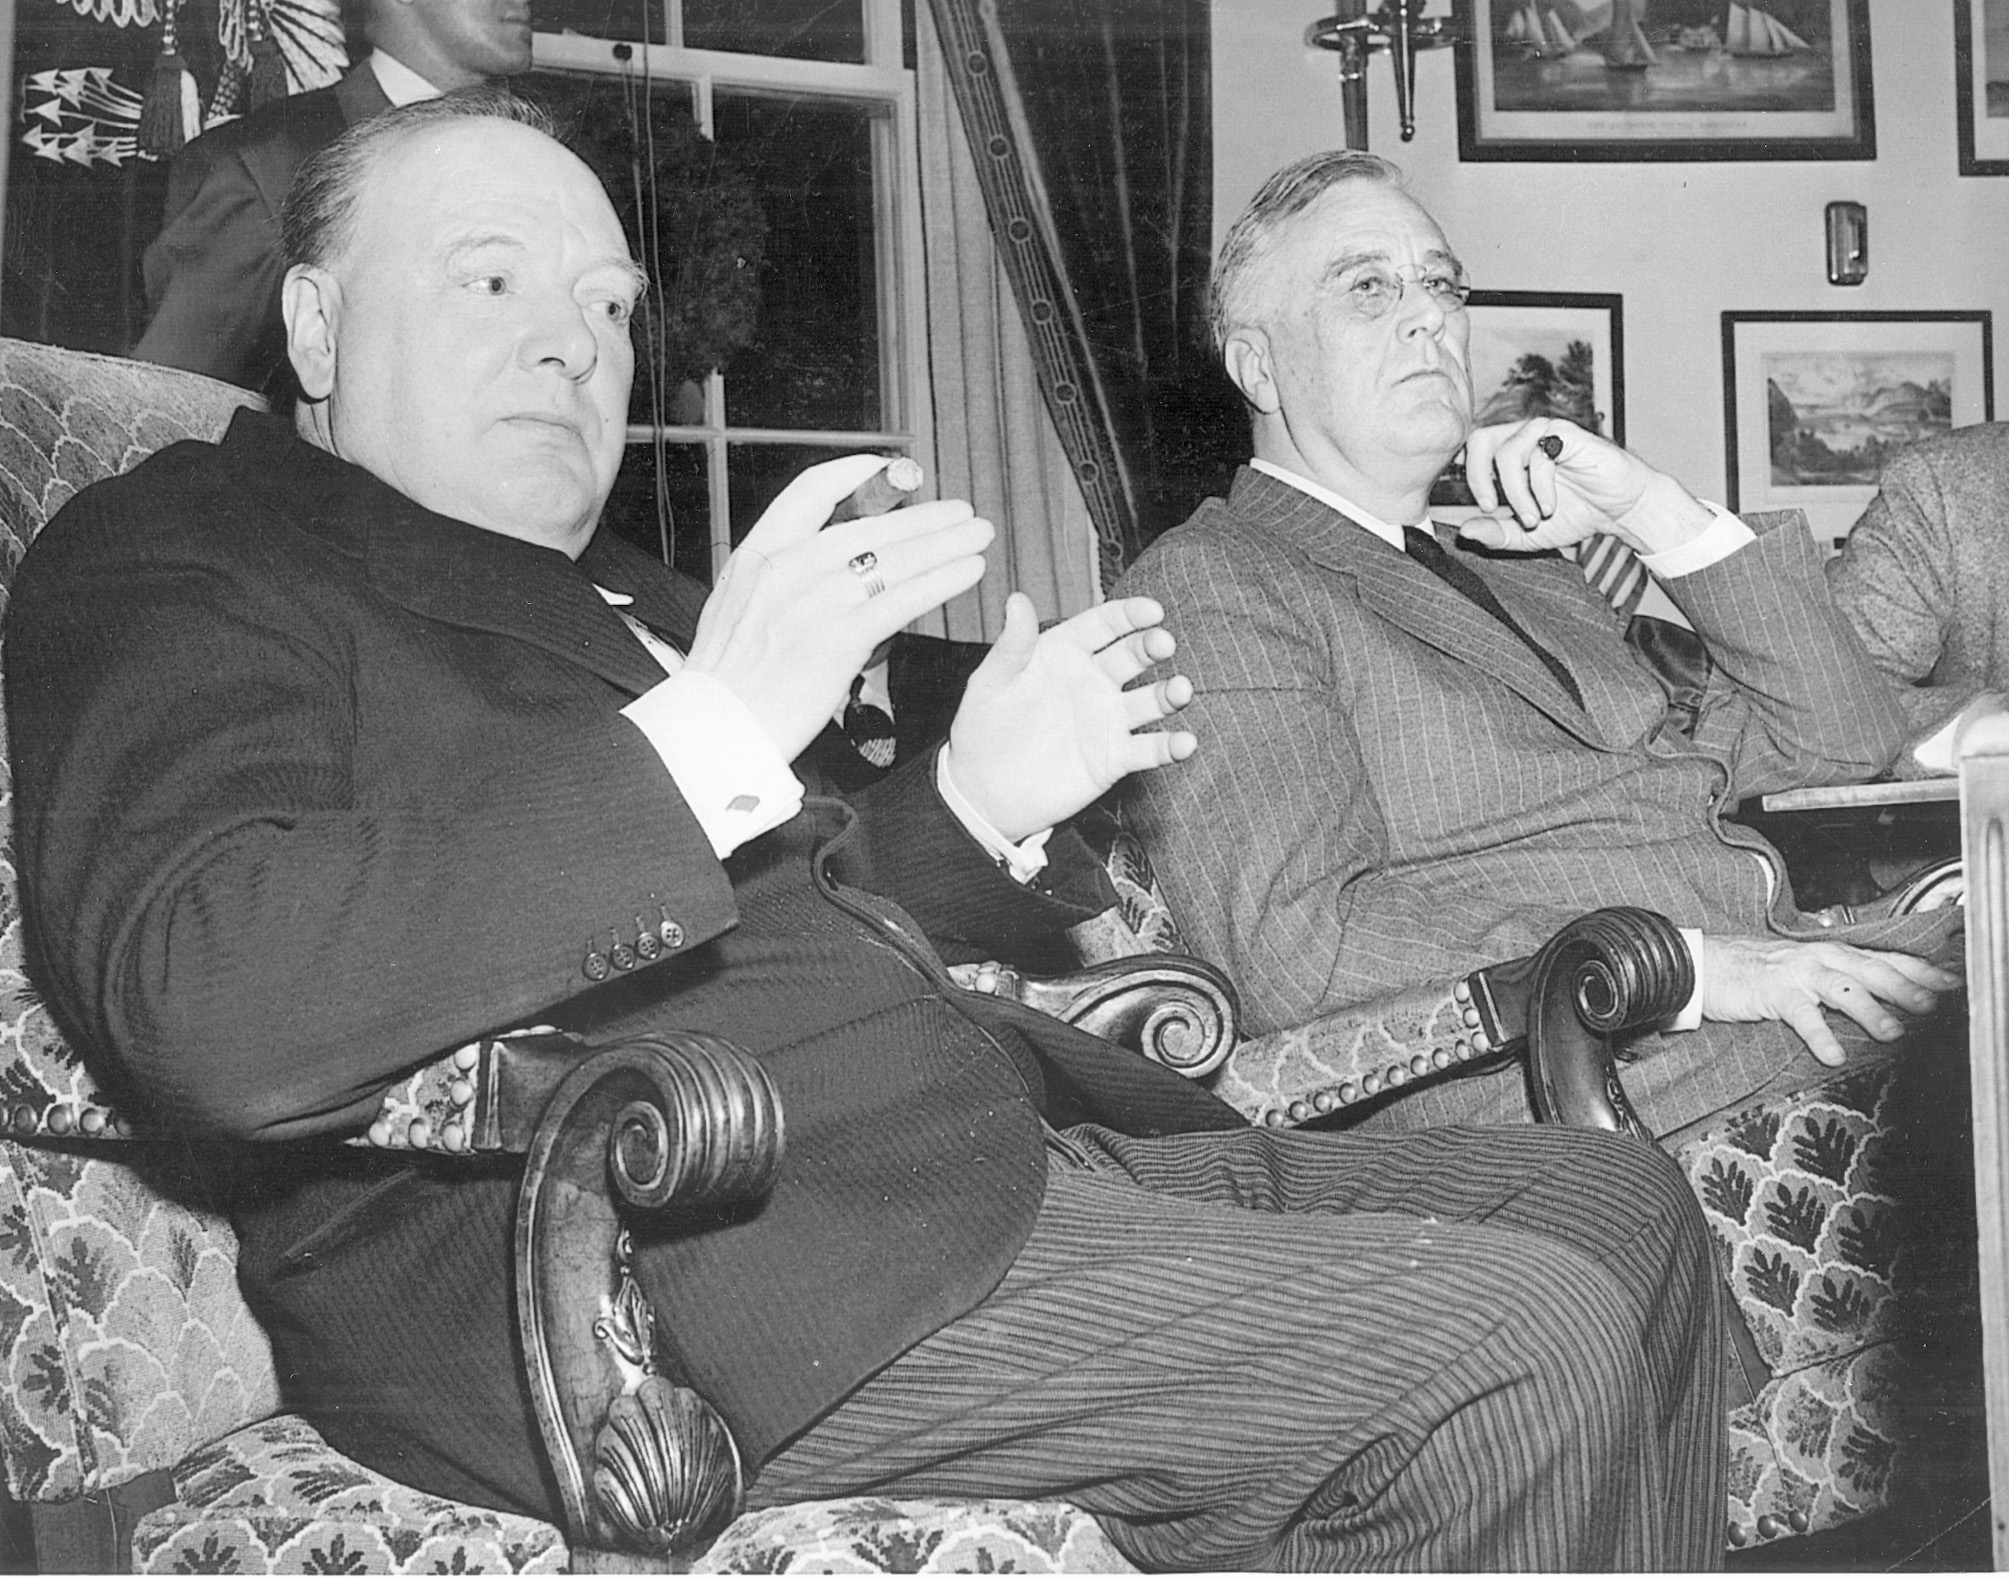 Roosevelt and Churchill field questions from the press, December 23, 1941.